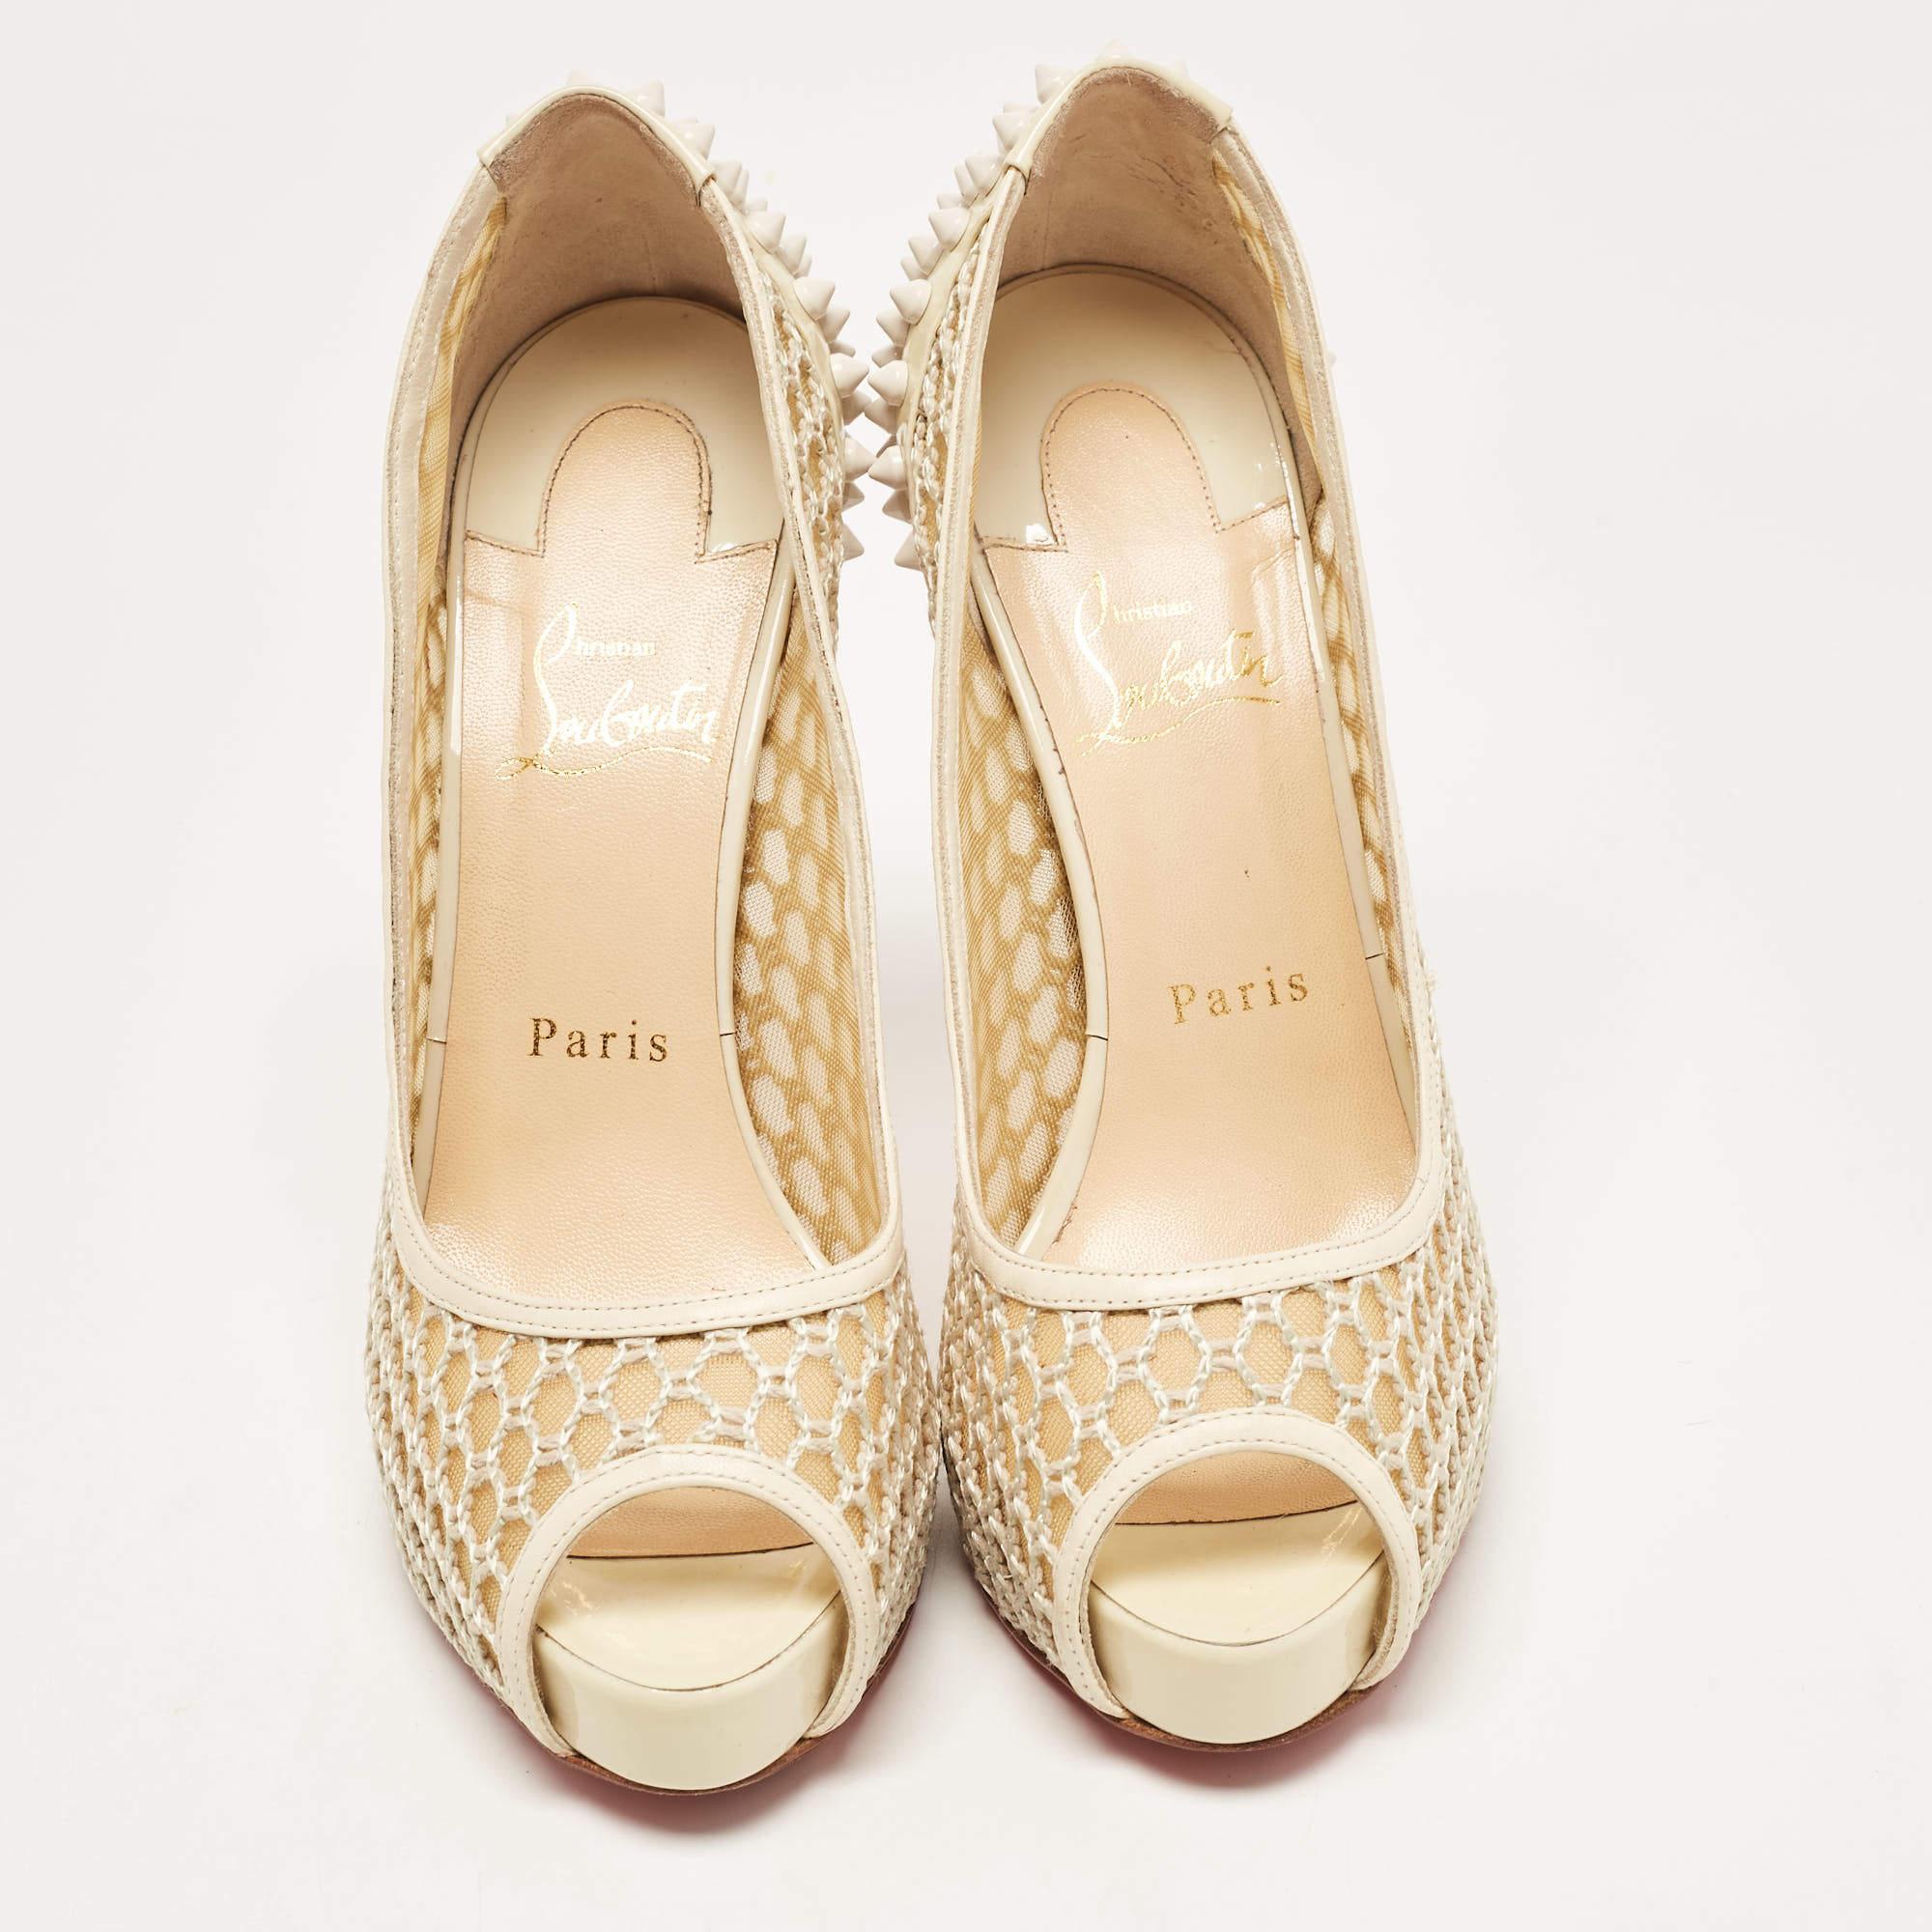 Christian Louboutin Cream Patent Leather and Mesh Guni Spiked Peep Toe Pumps Siz In Good Condition For Sale In Dubai, Al Qouz 2